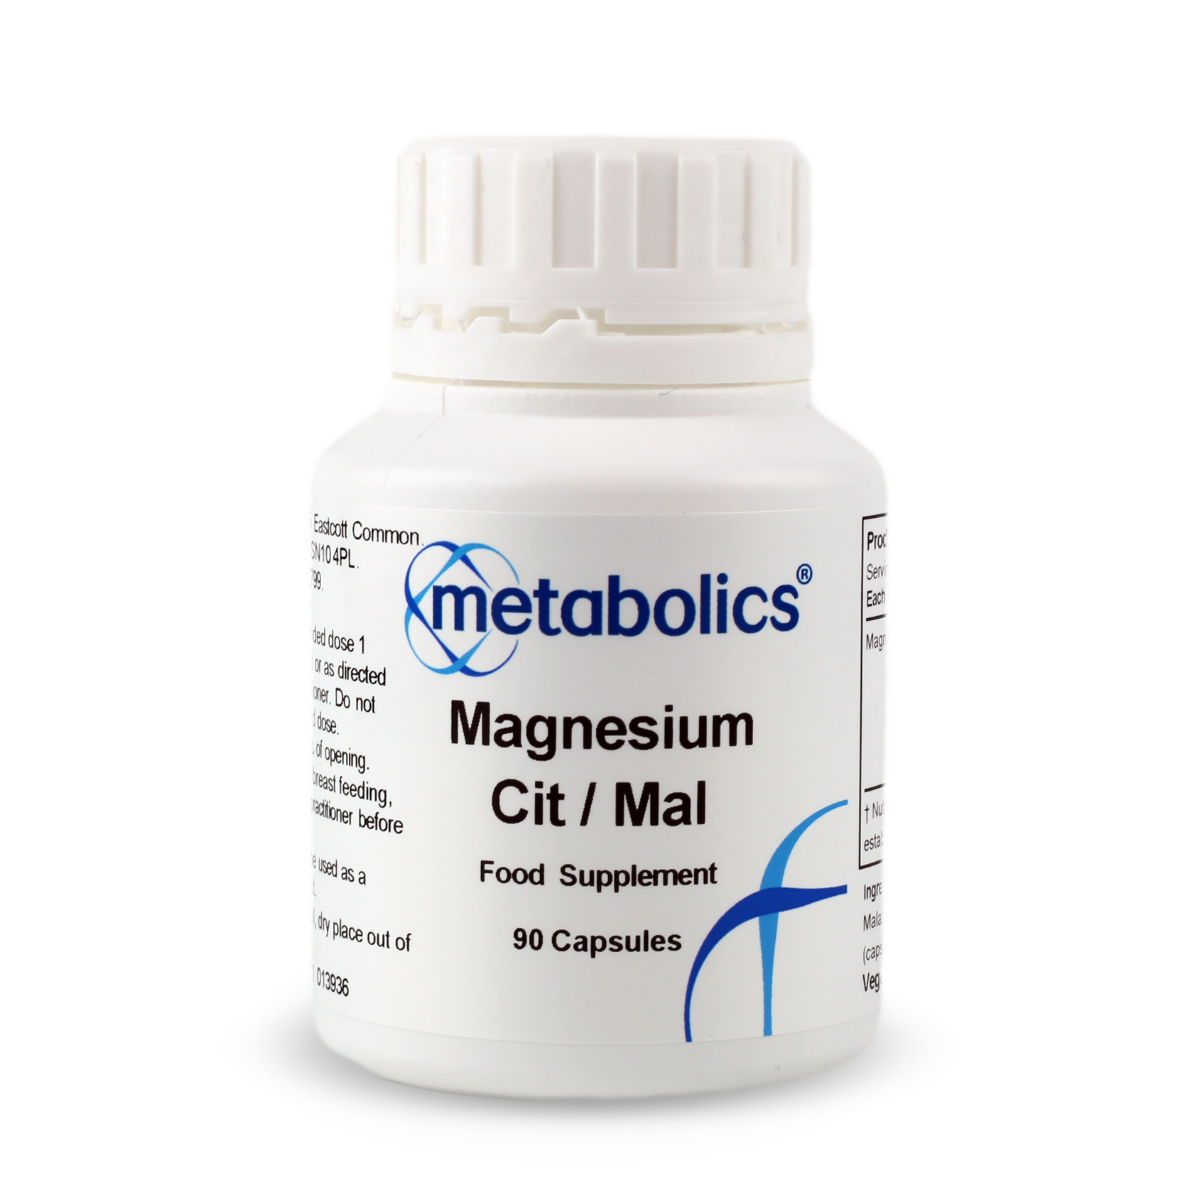 Magnesium Citrate Malate